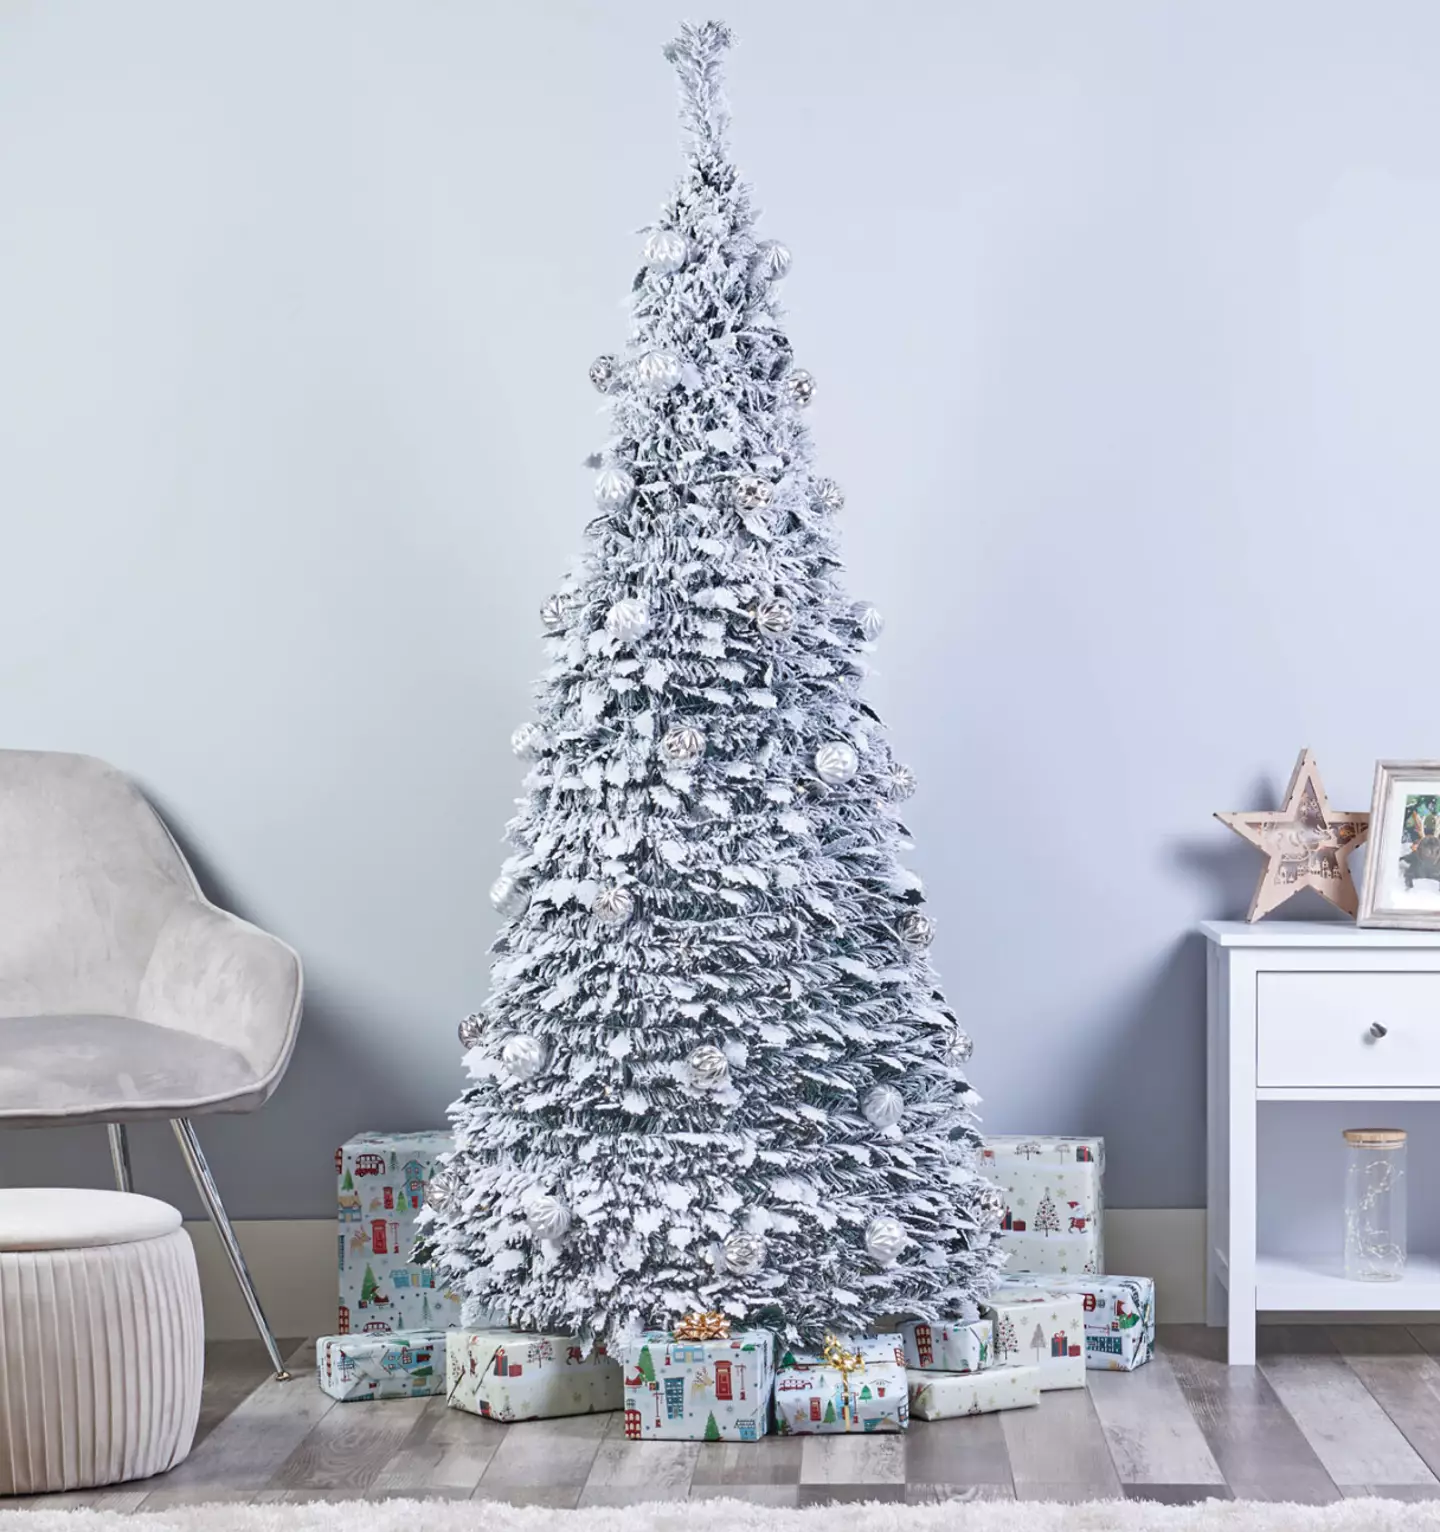 The tree looks to be a style from The Range, priced at £119.99.